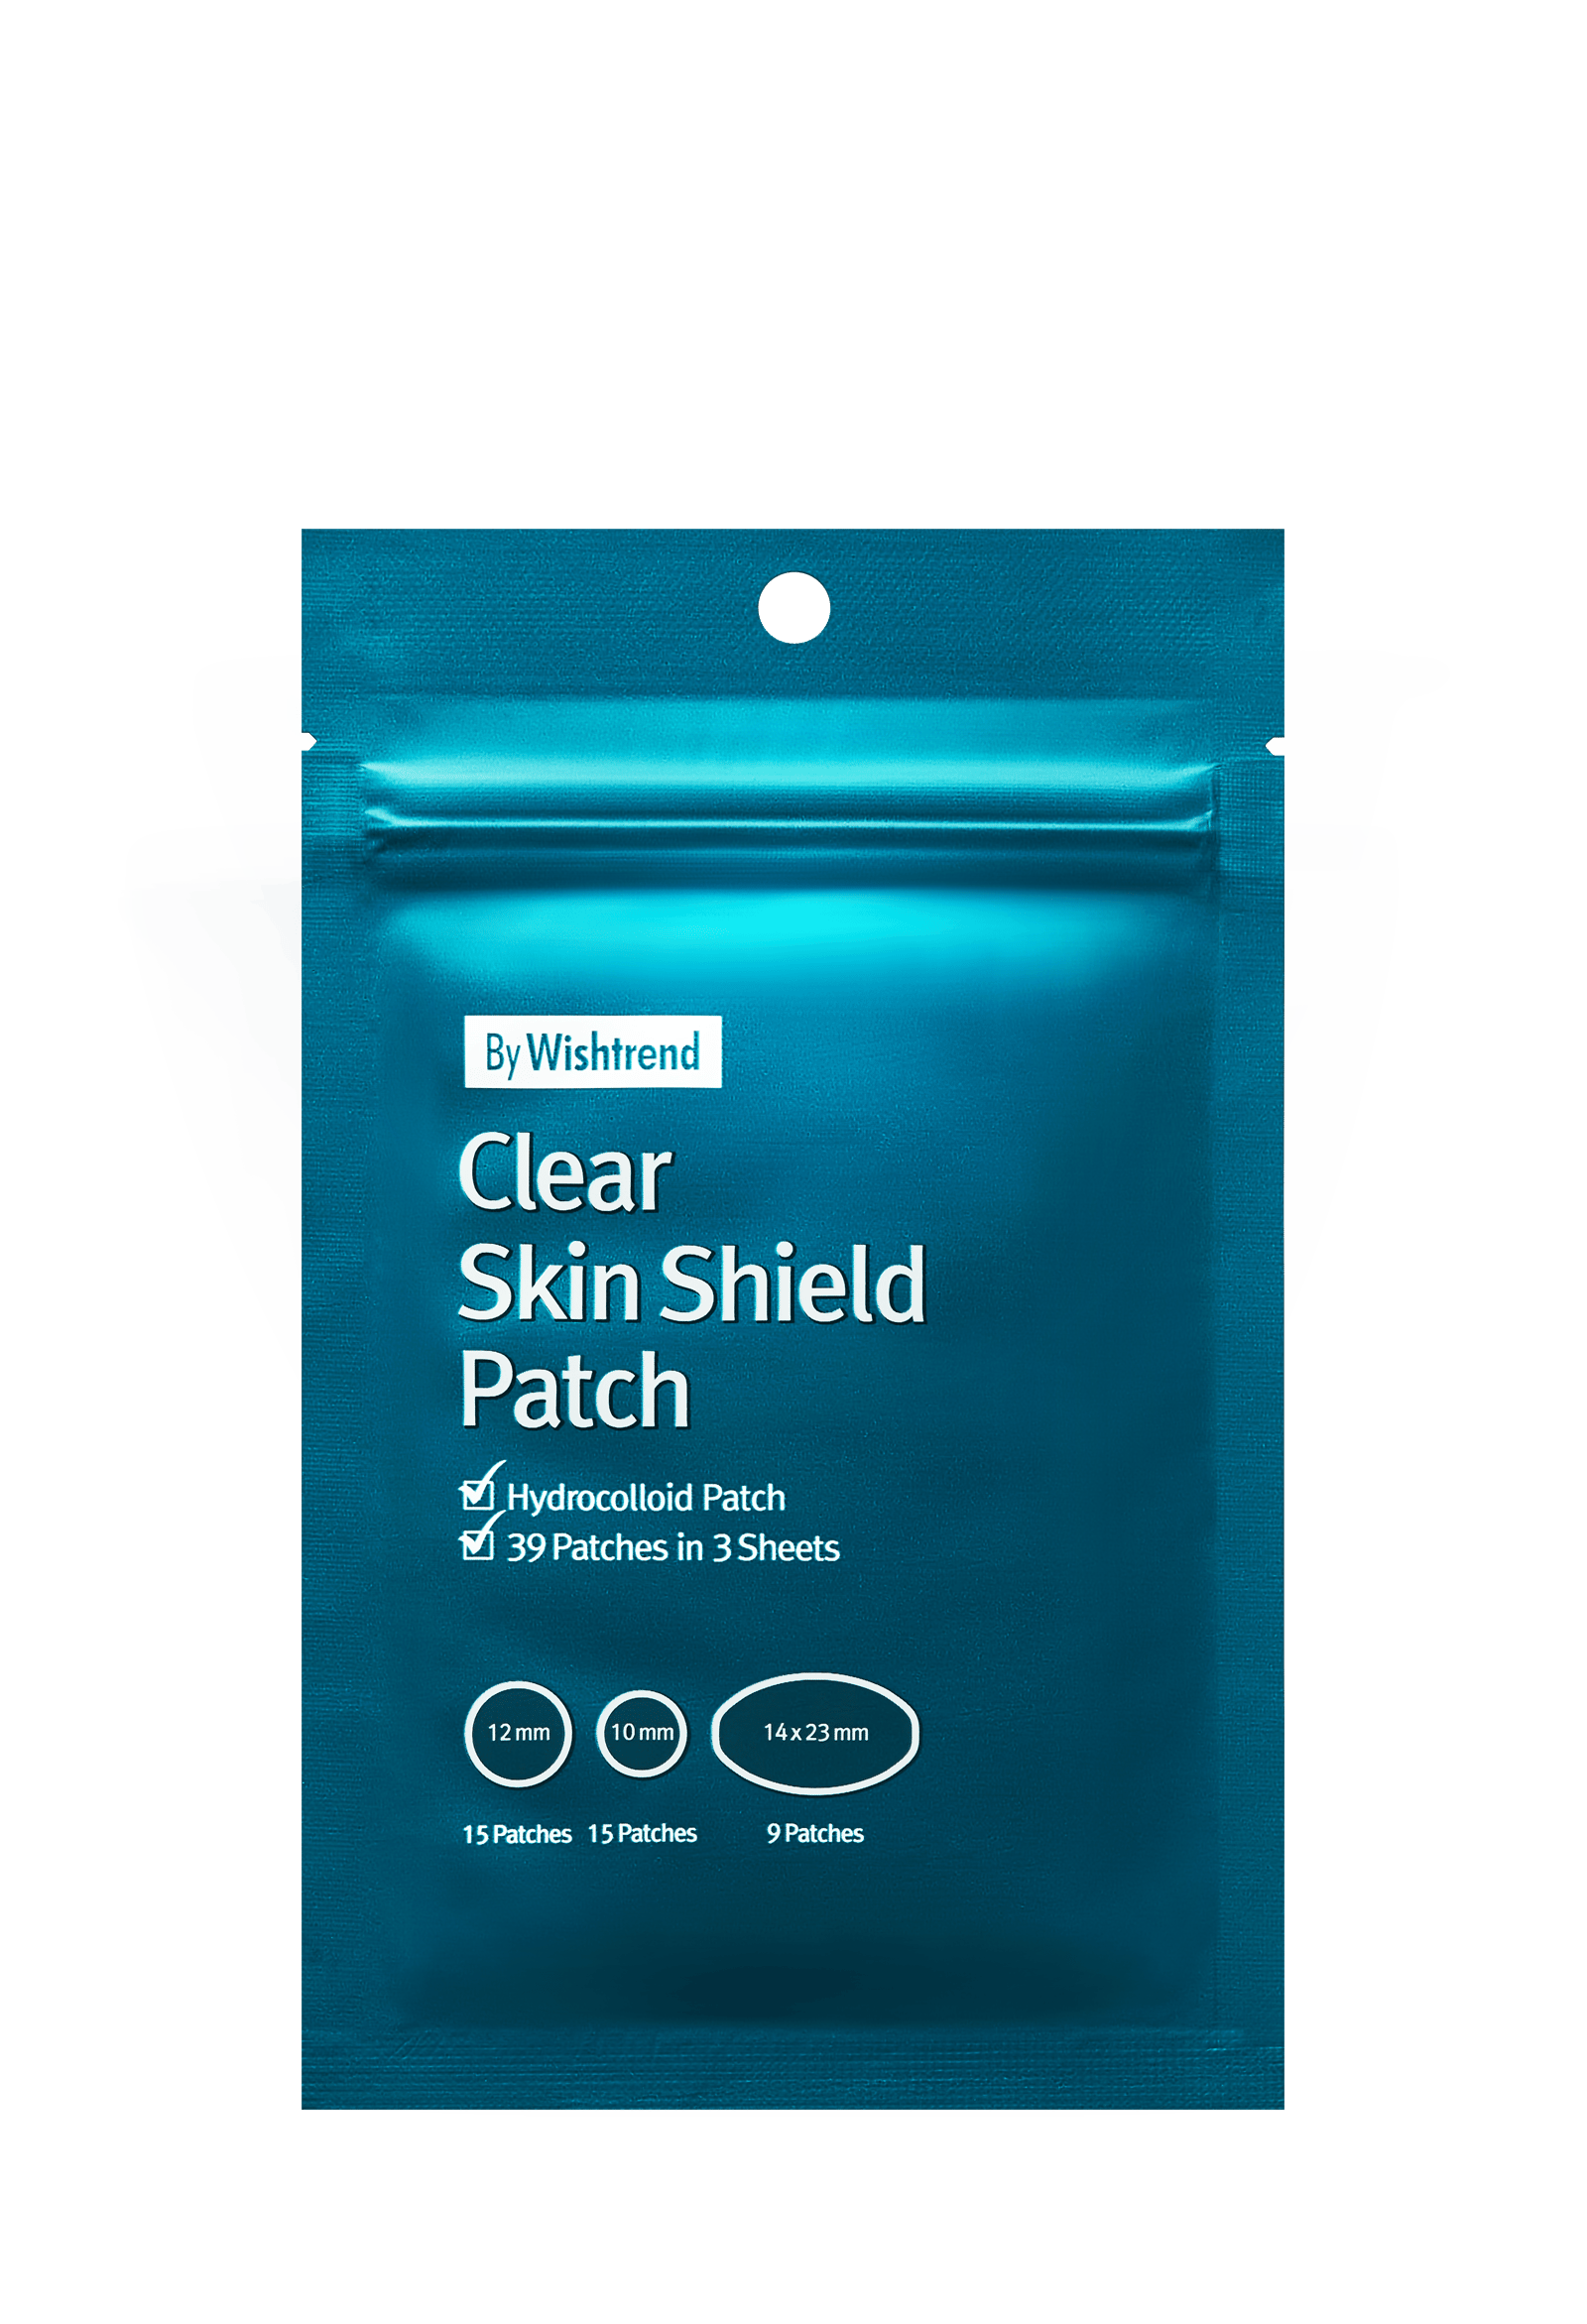 By Wishtrend Clear Skin Shield Patch 39 st